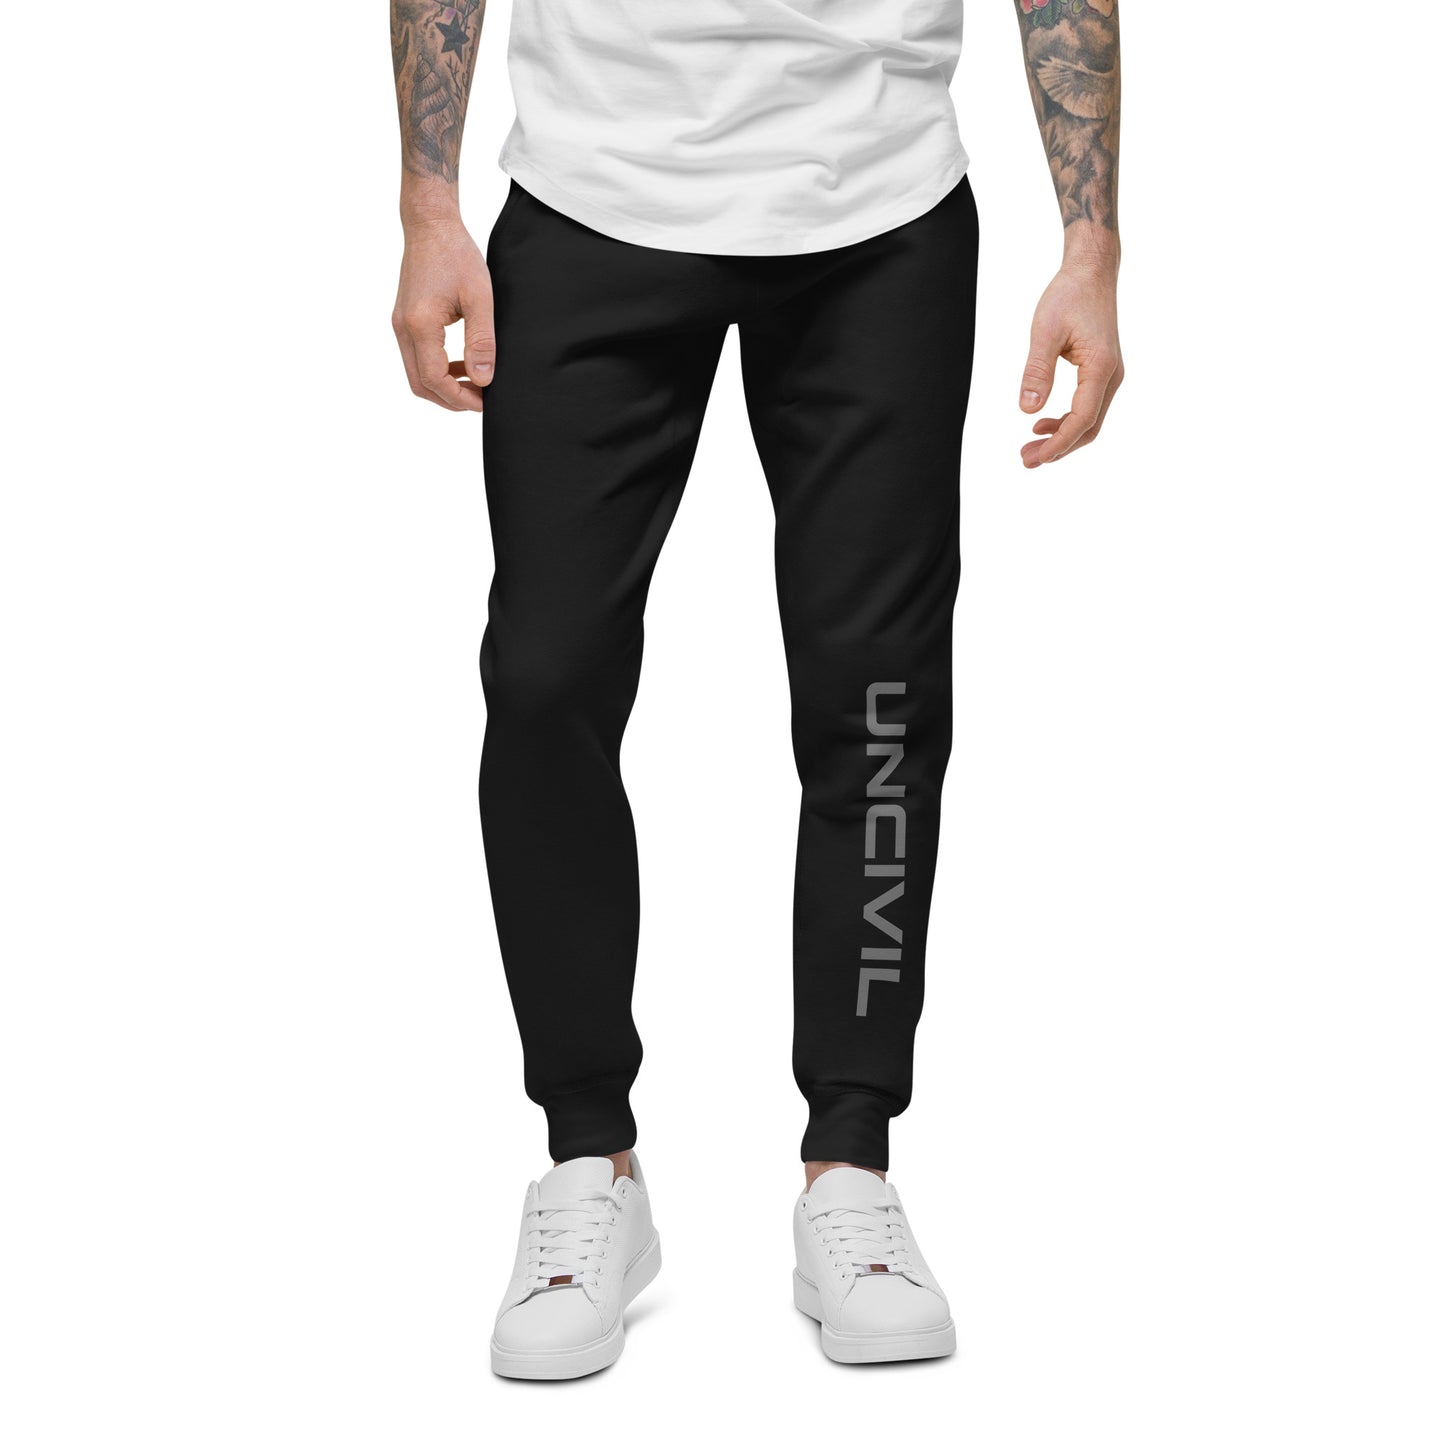 Black sweatpants, UNCIVIL on front left leg and UNCIVIL patch on the back right pocket.